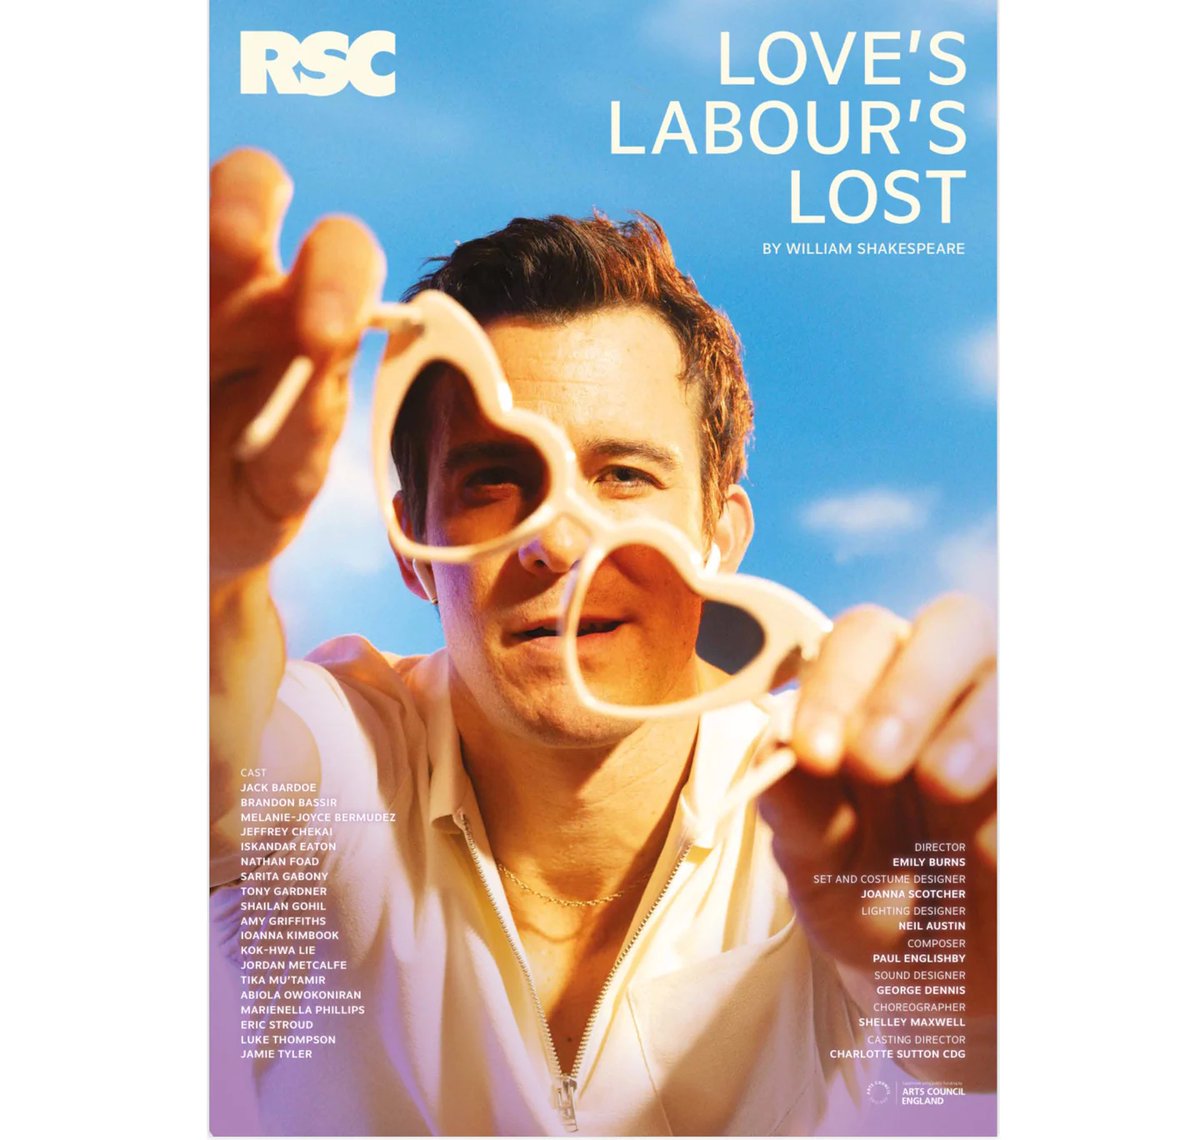 Paul Englishby has scored the new production of Love’s Labour’s Lost. Directed by Emily Burns in her @thersc debut, this sharp, playful and refreshingly contemporary take on Shakespeare’s vibrant comedy is playing at Royal Shakespeare Theatre, Stratford until 18 May.